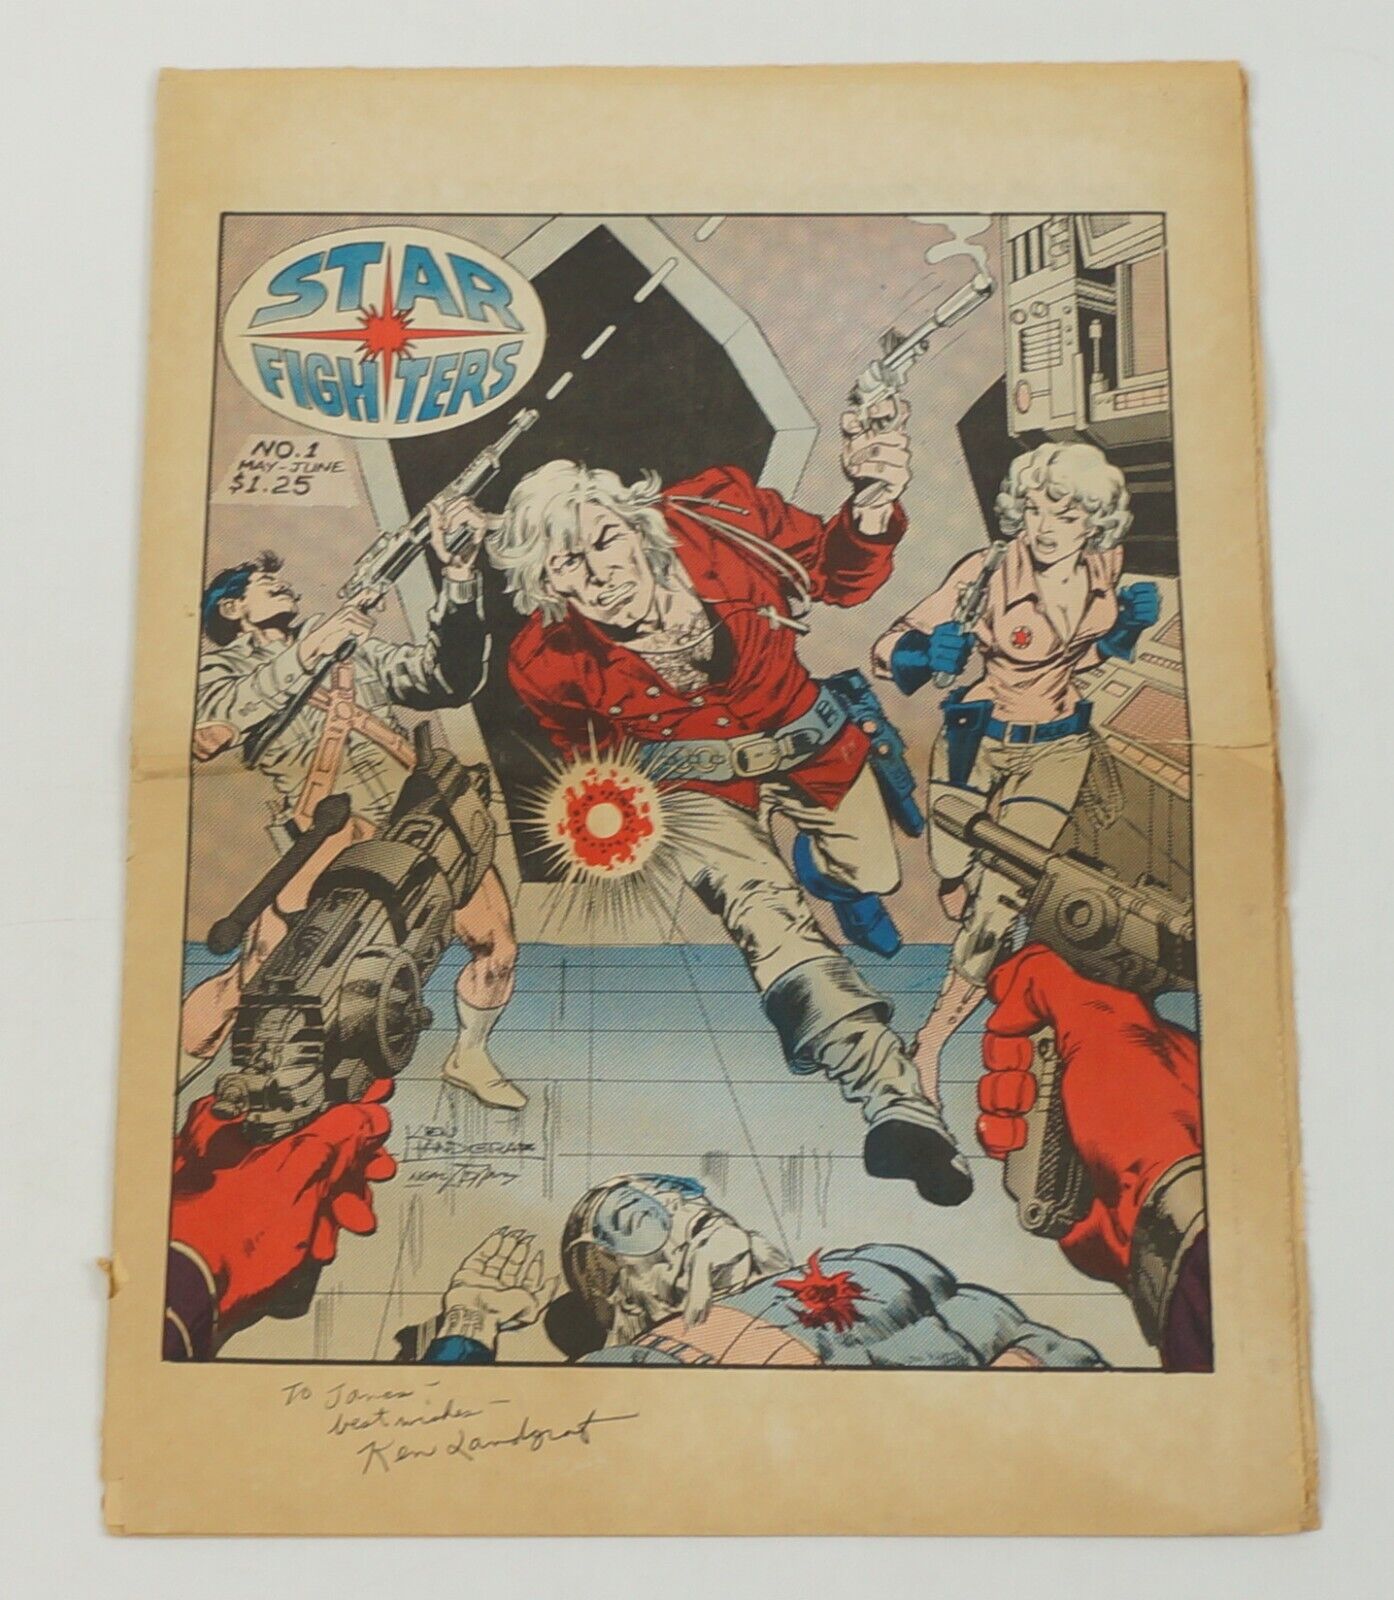 Starfighters #1 - SIGNED by Ken Landgraf - Neal Adams cover - May 1979 low grade